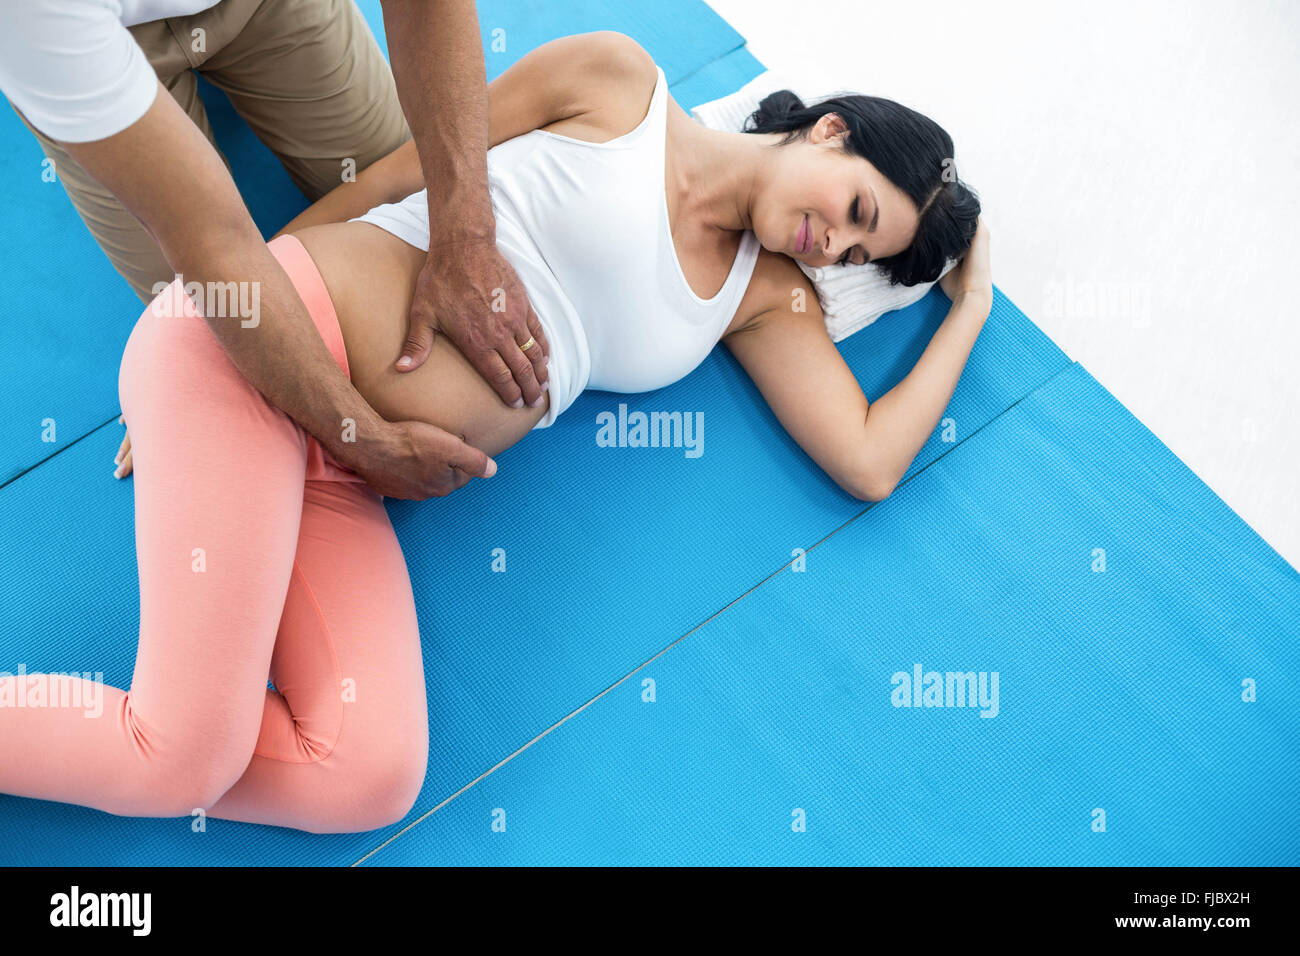 Doctor giving physiotherapy to pregnant woman Stock Photo